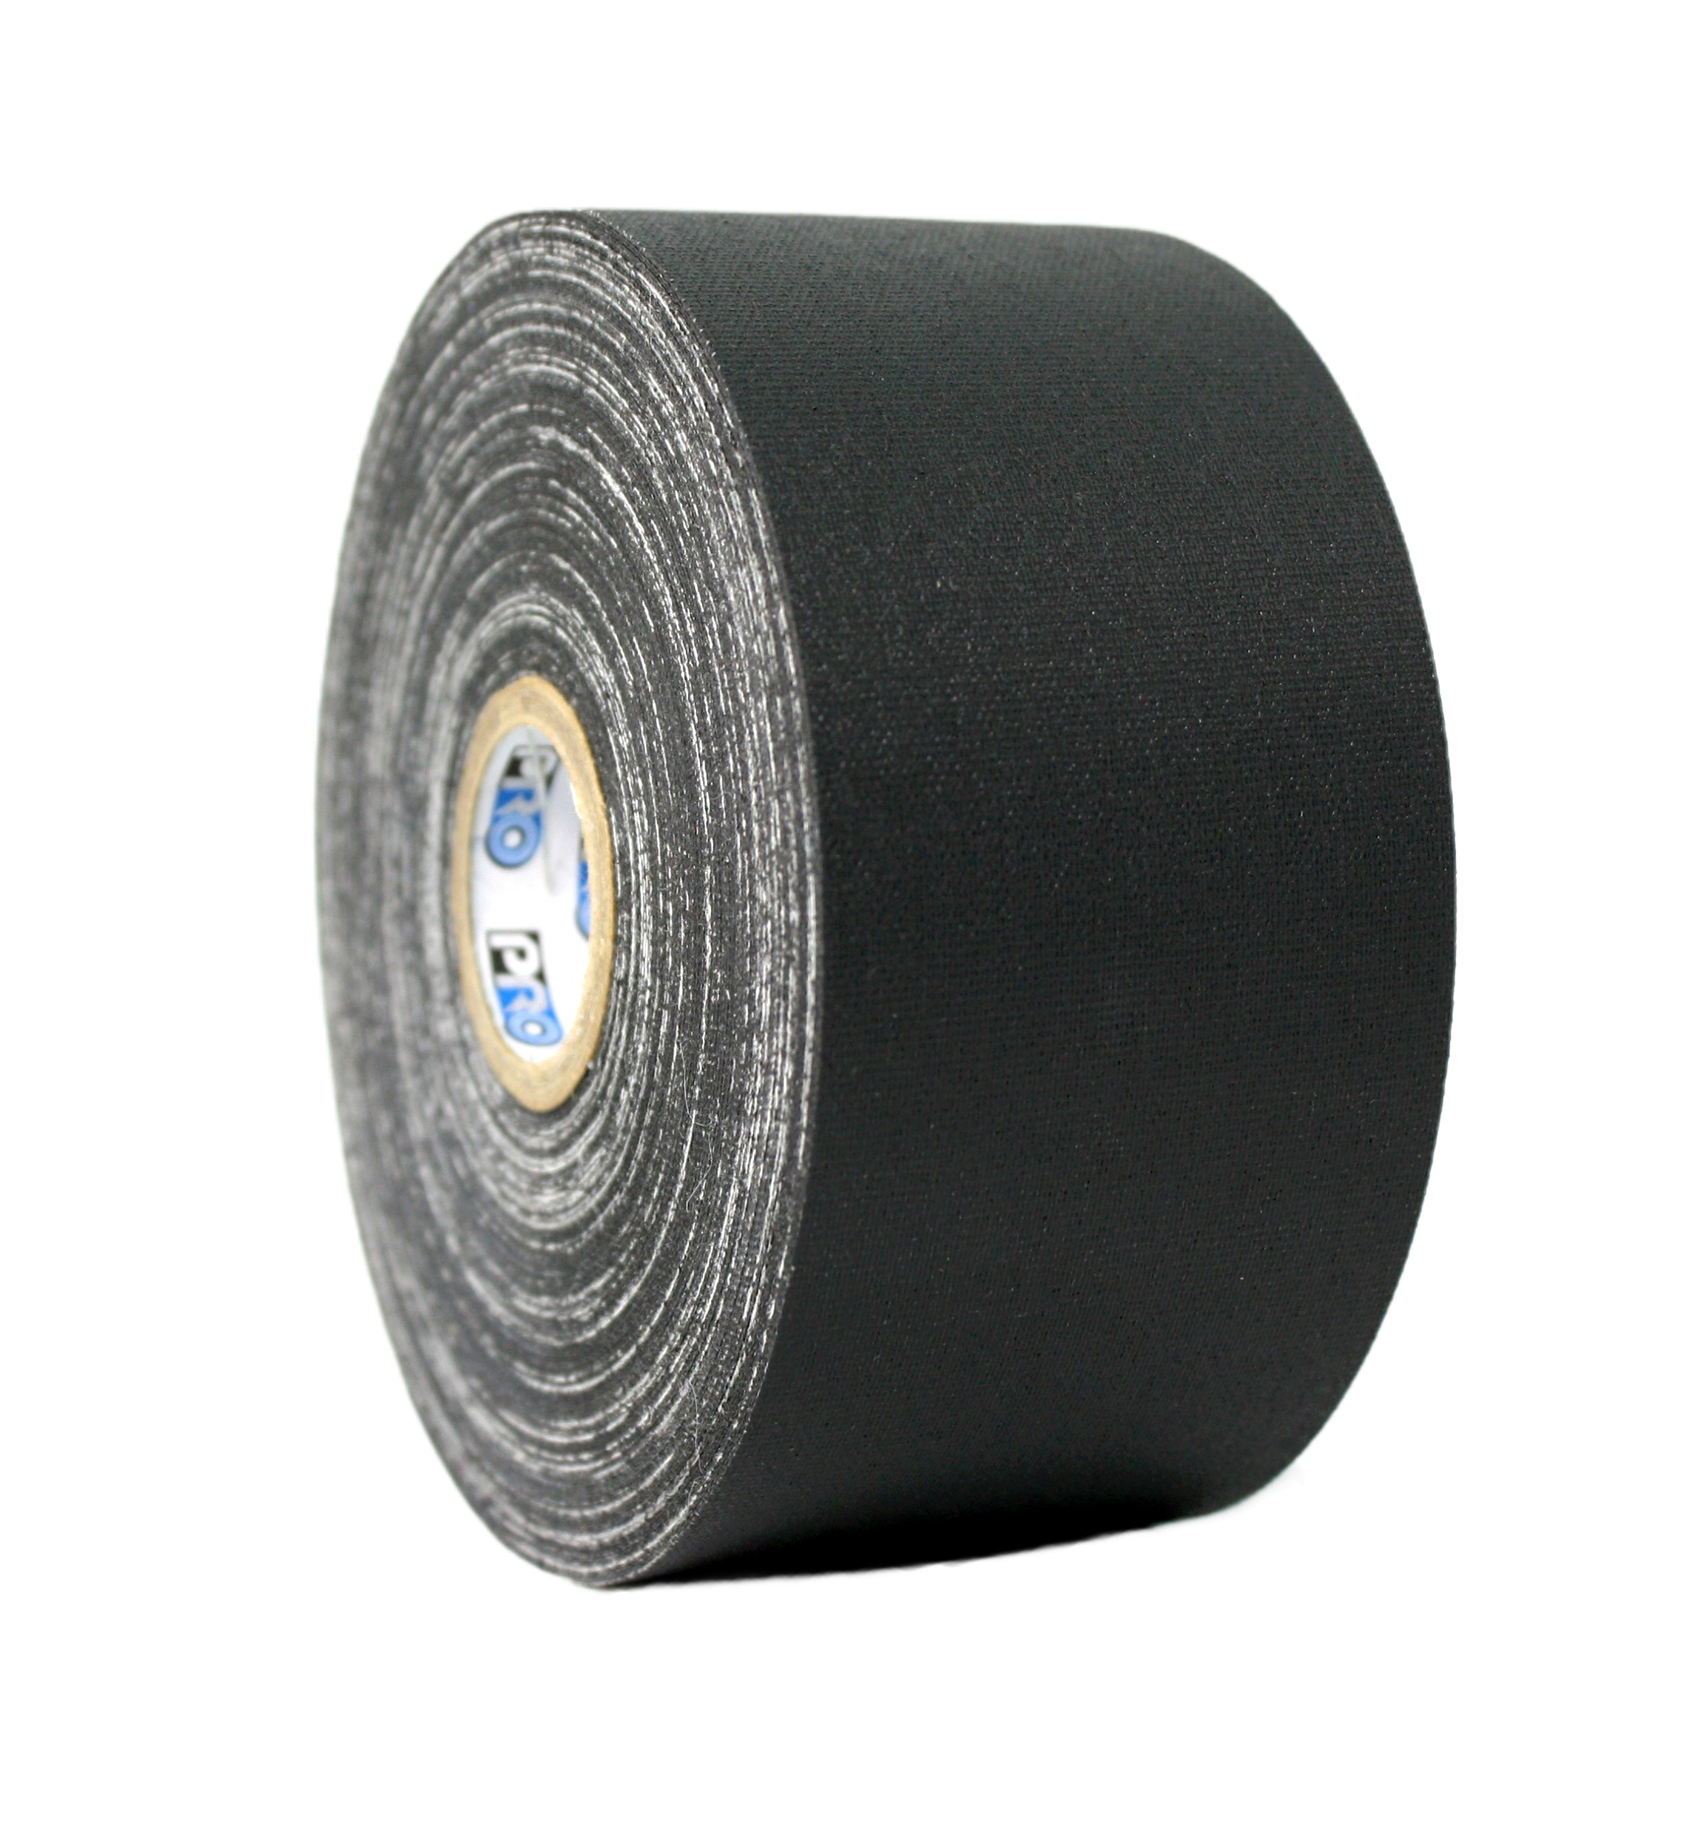 A close up of a 2" roll of Pro Gaff tape, small core